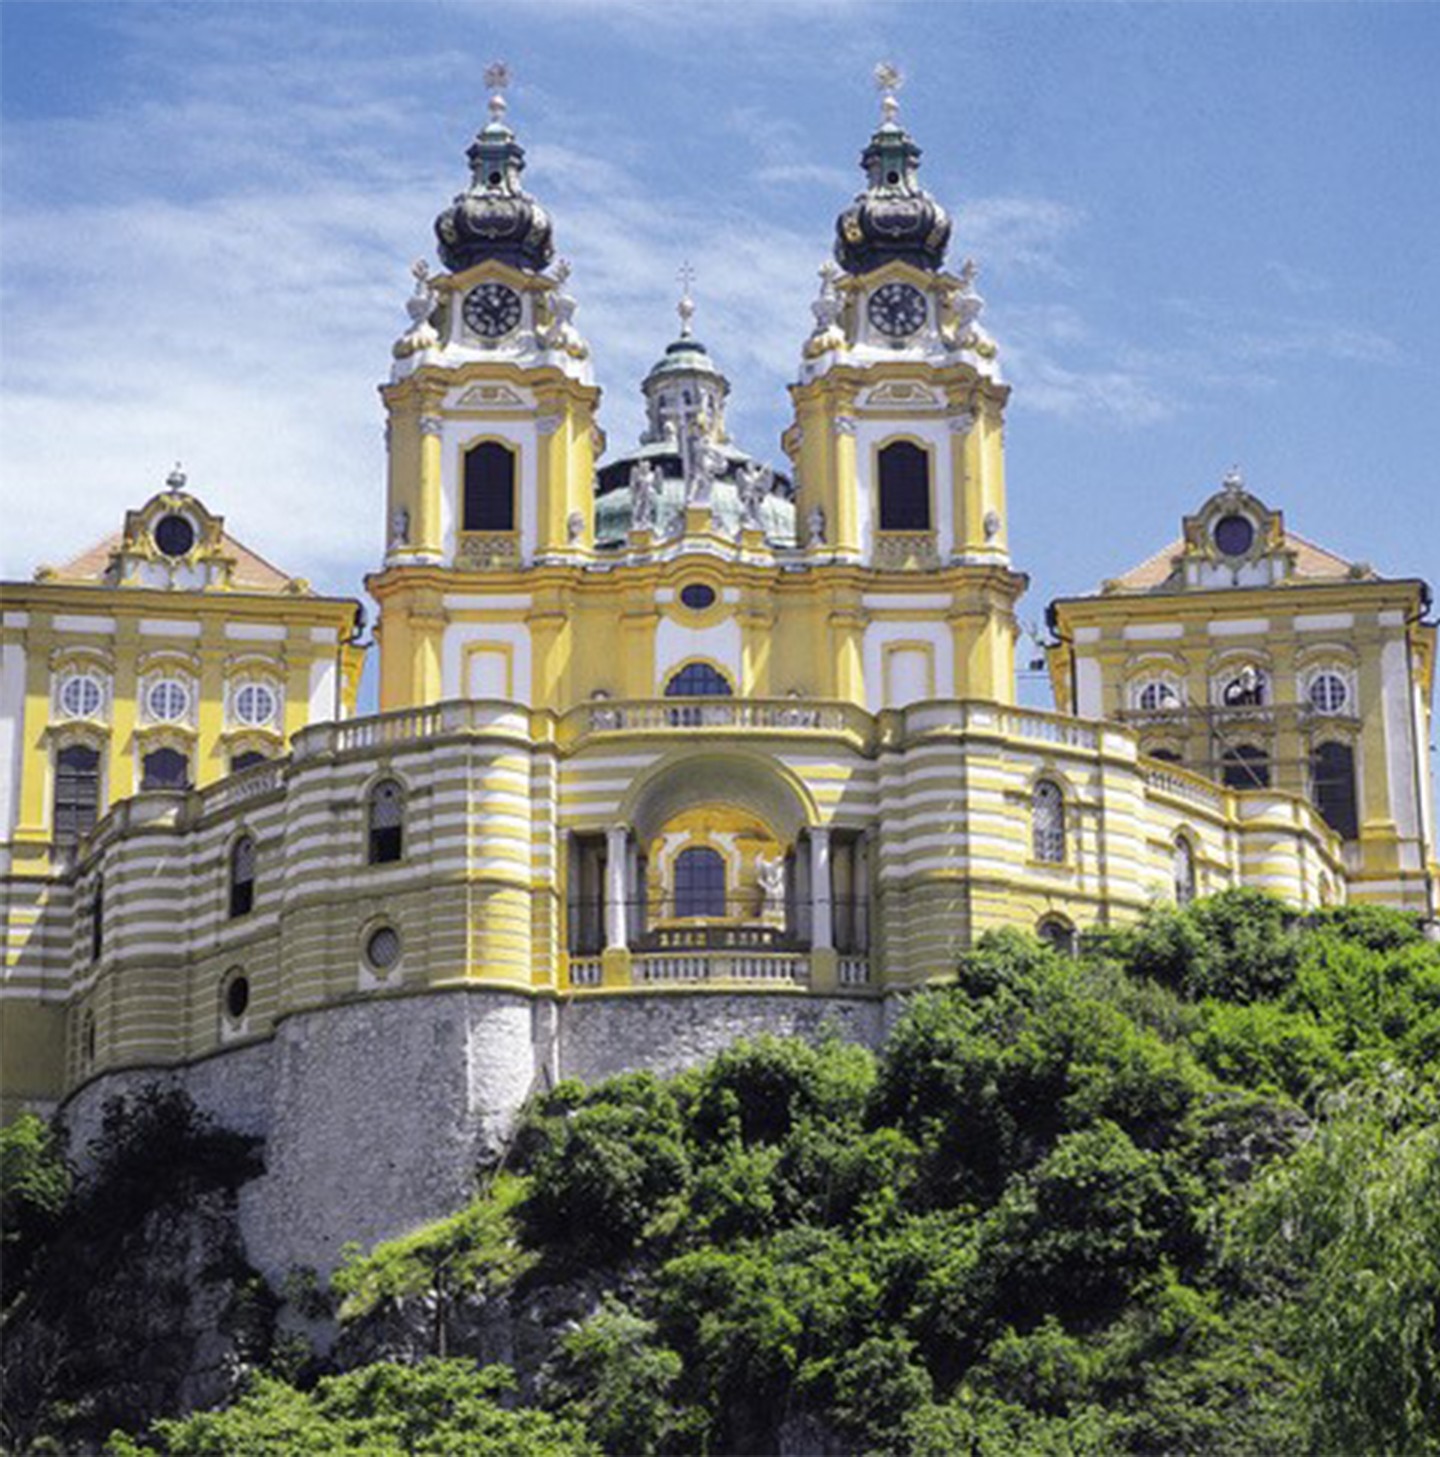 Image of the Melk Abbey promoting the Vienna Getaway travel program